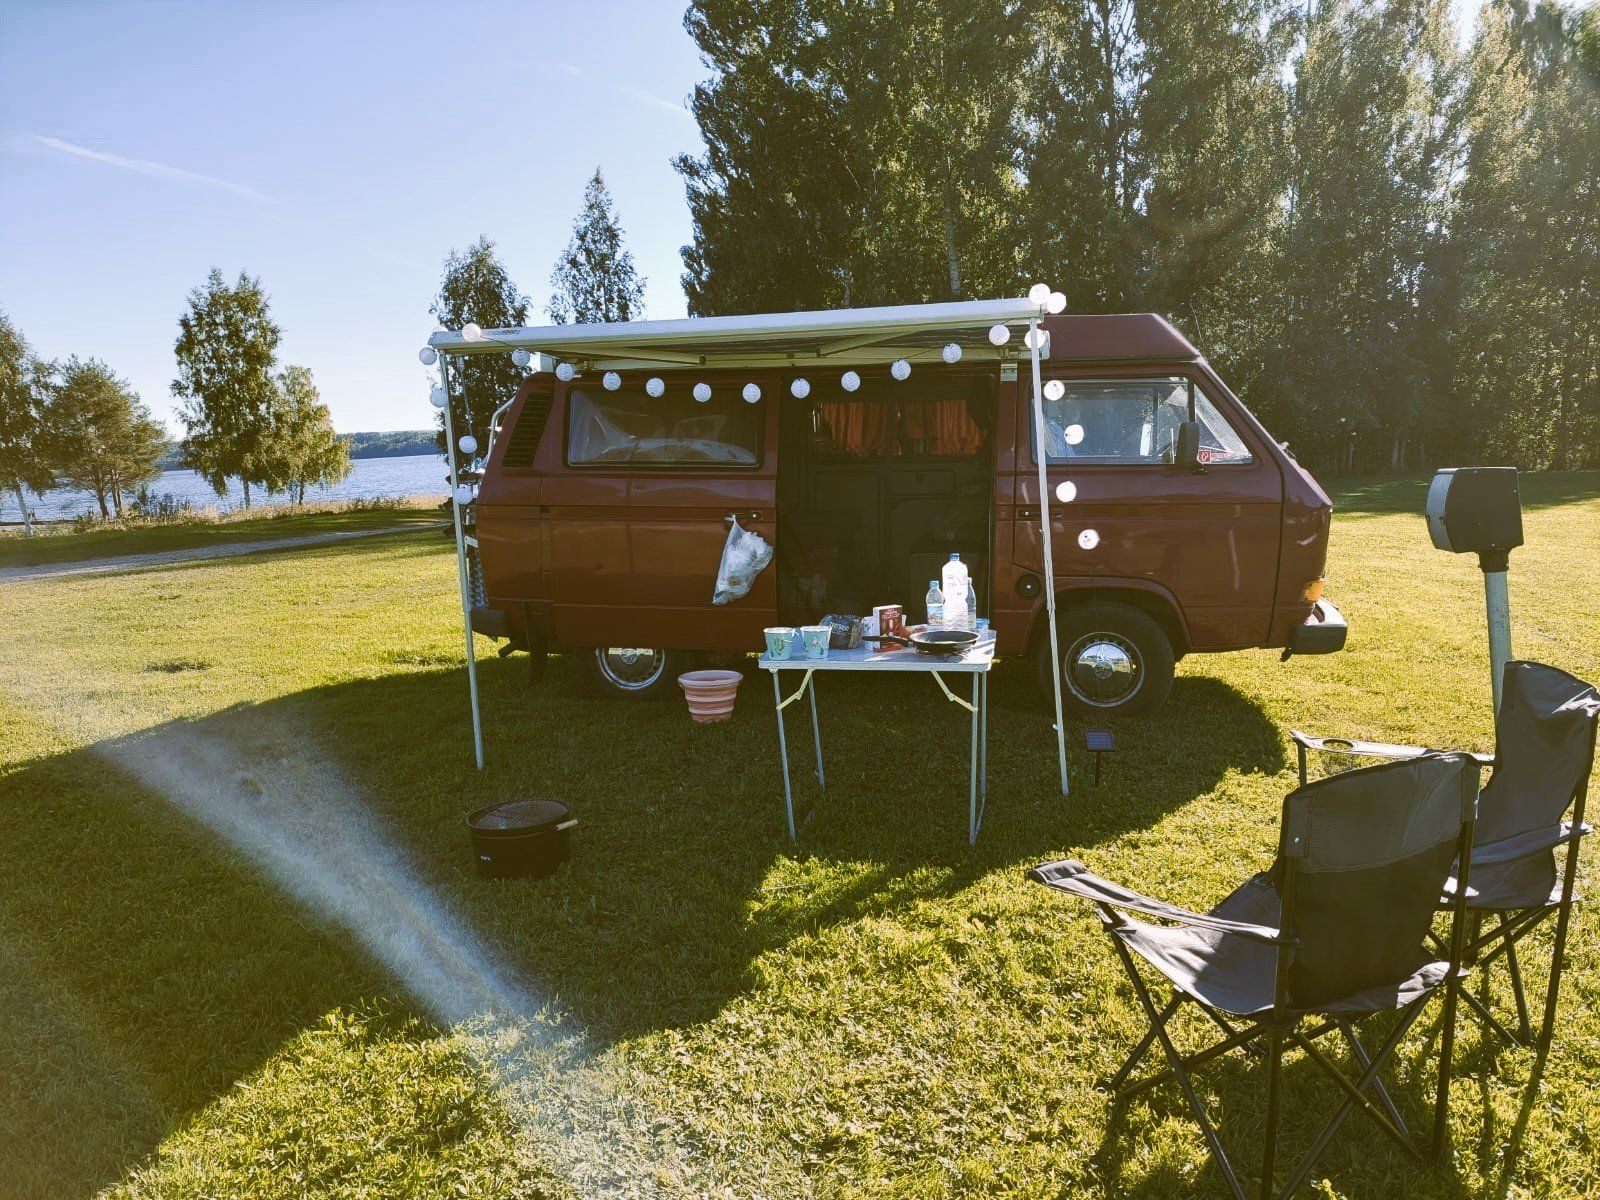 A red van is parked in a grassy field with a table and chairs